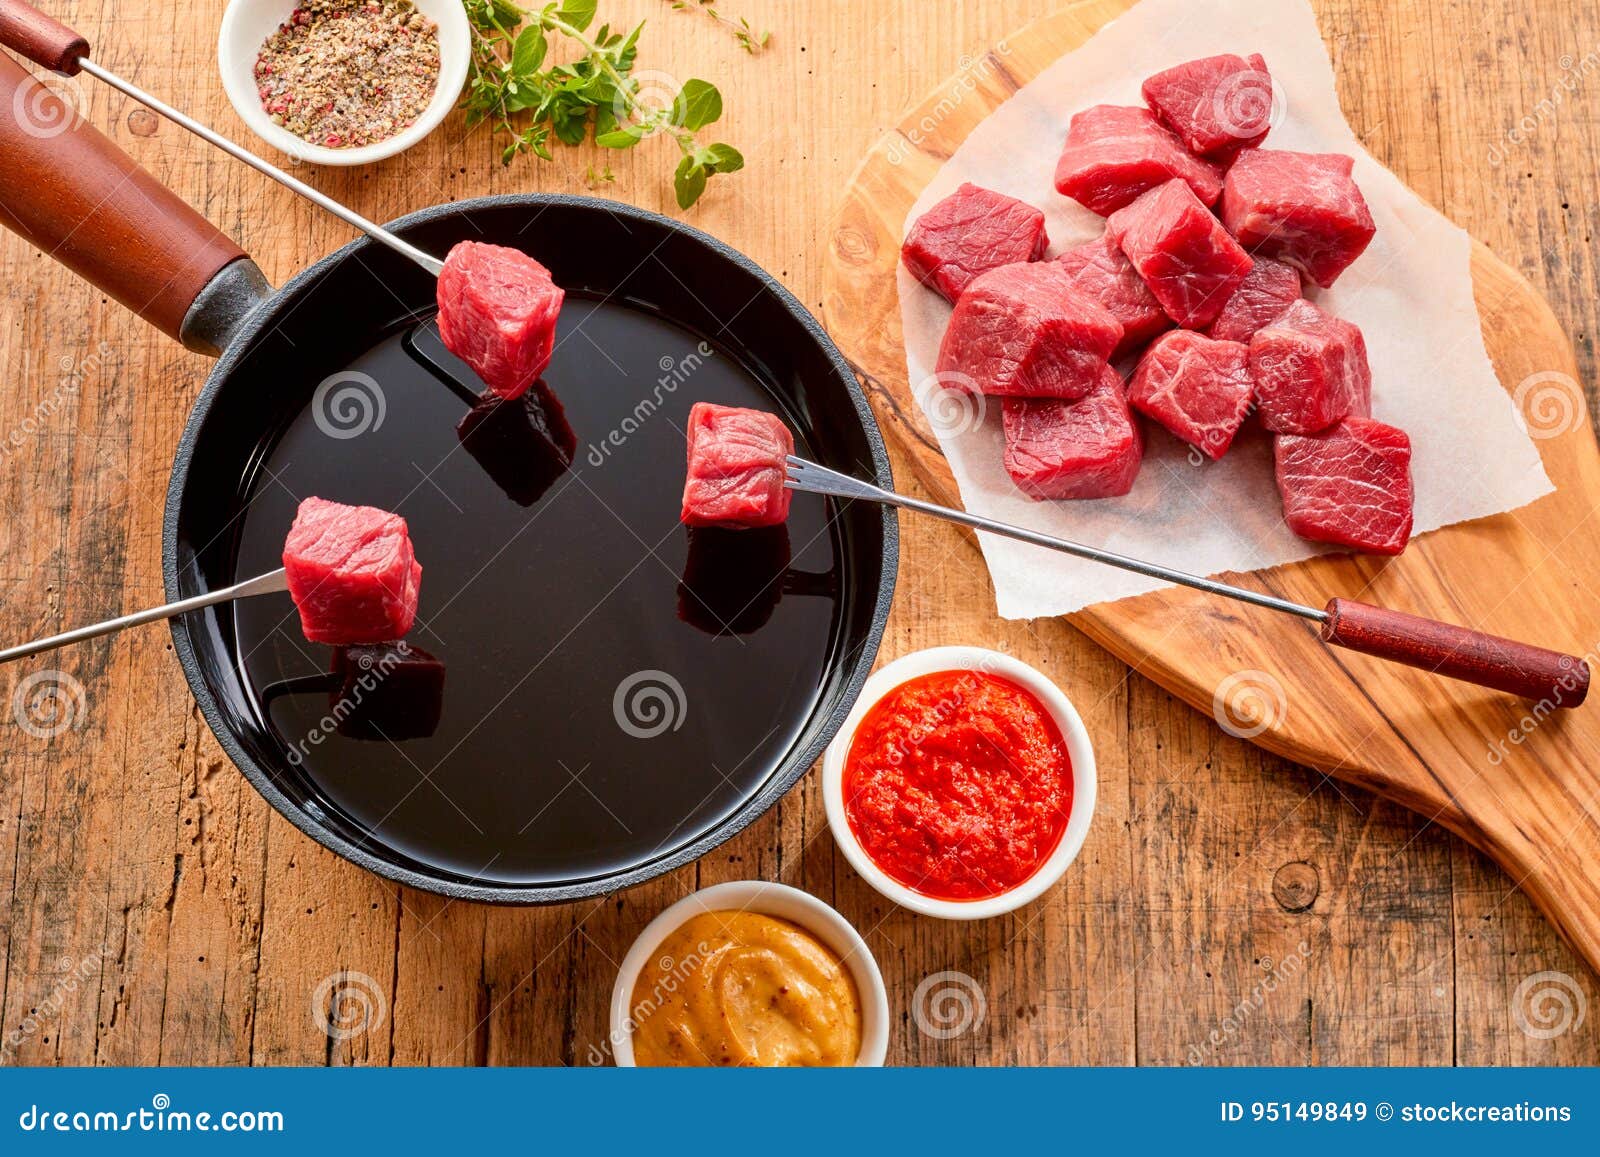 tender prime beef being cooked in a fondue